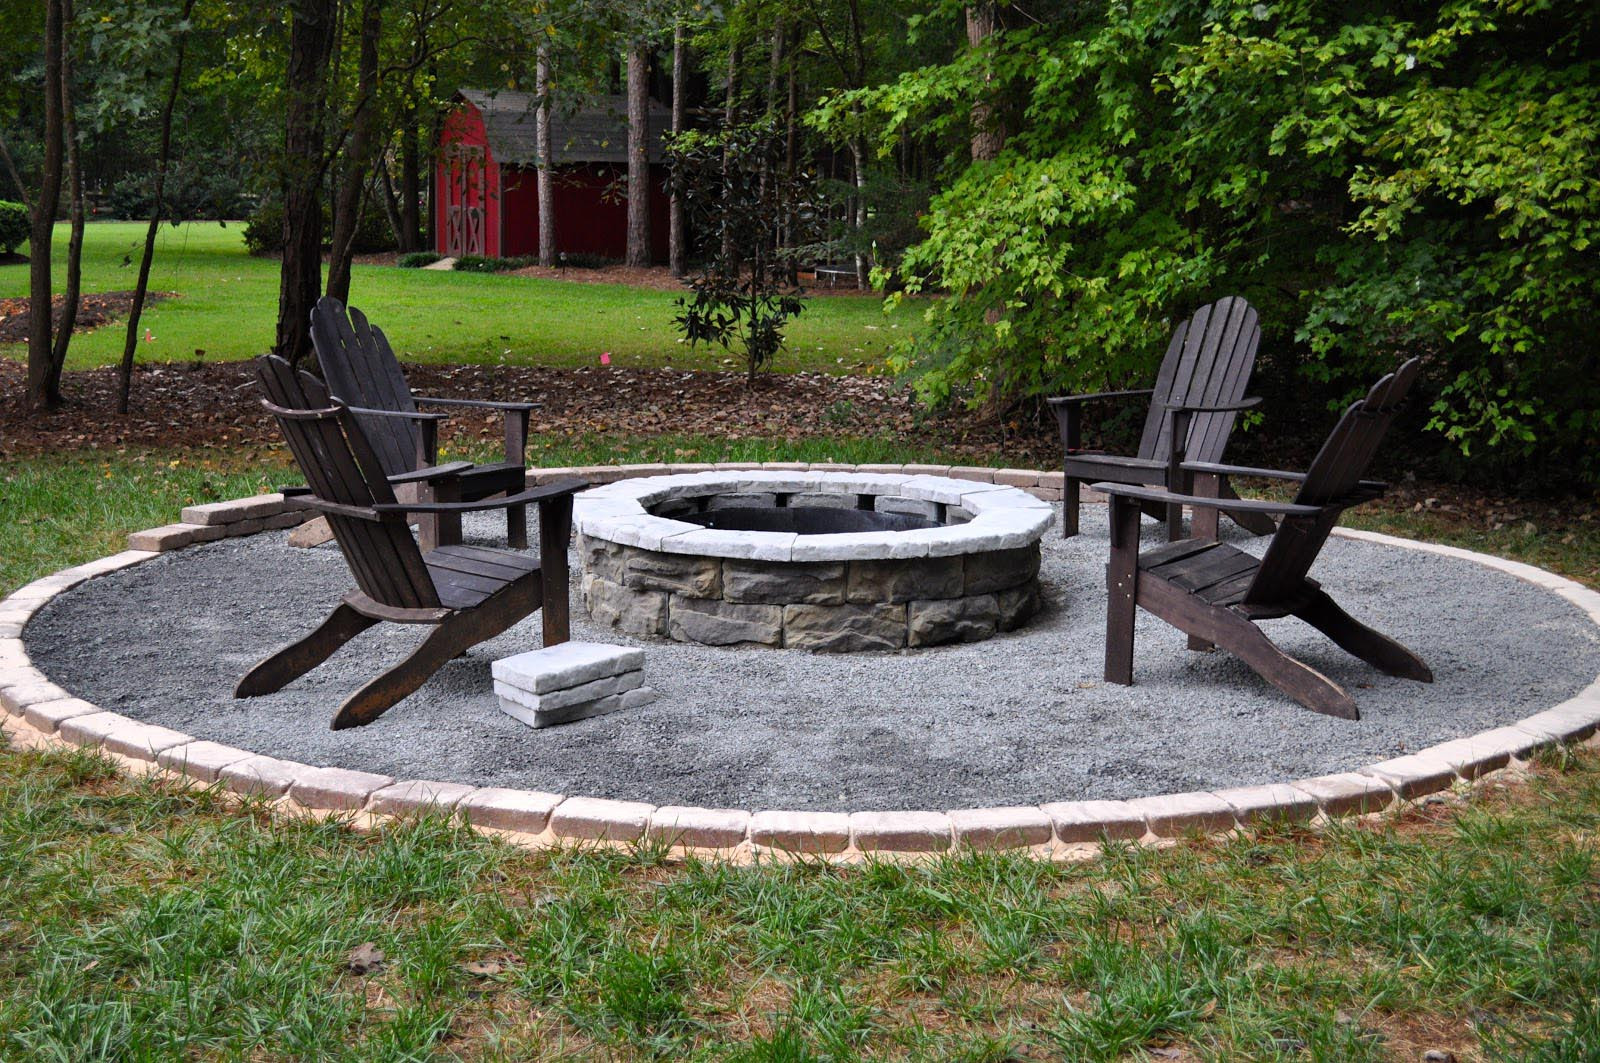 Small Fire Pit For Balcony
 Everyone Needs a Small Fire Pit